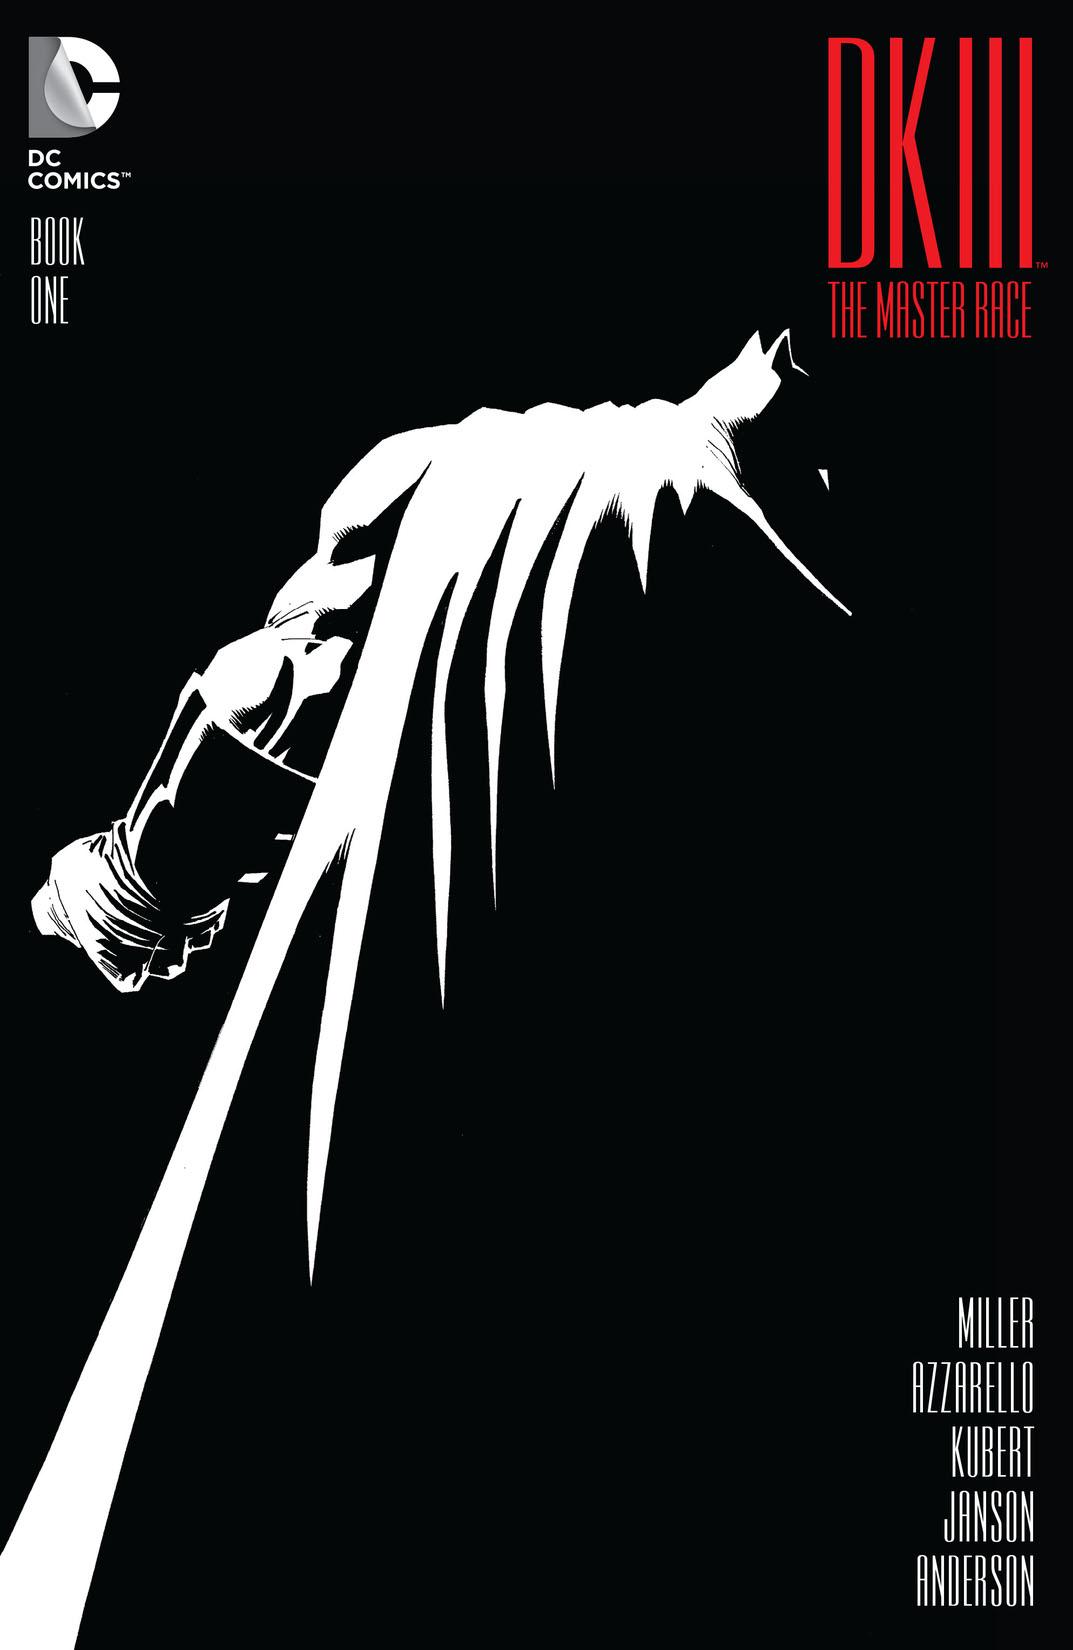 Dark Knight III: The Master Race #1 preview images